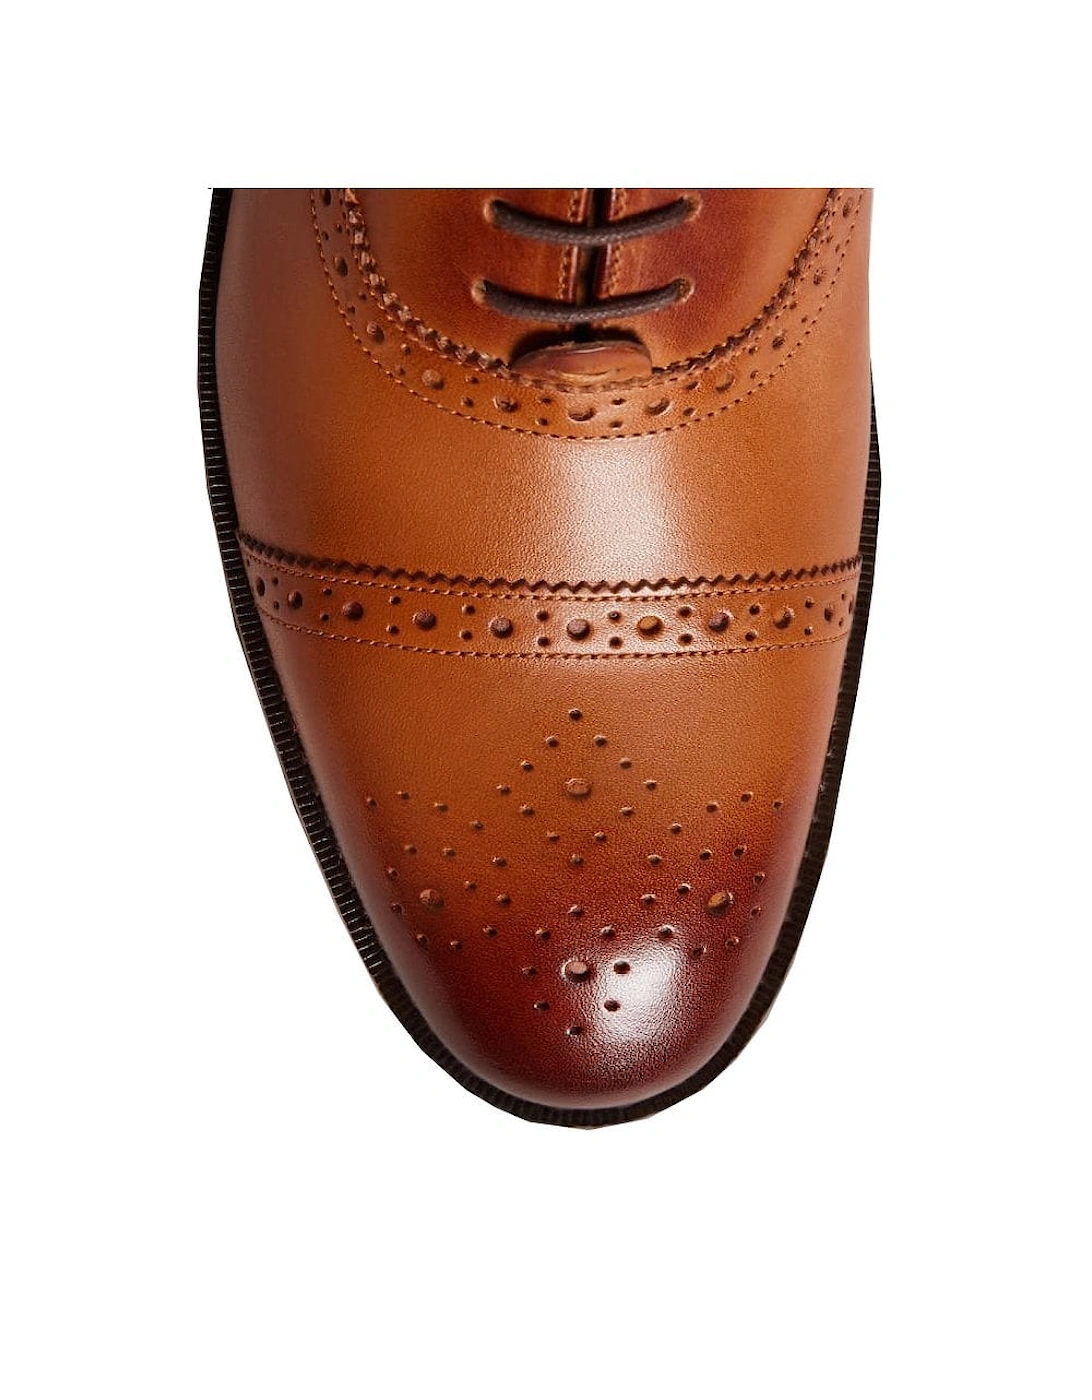 Men's Tan Arnie Leather Brouge Shoes